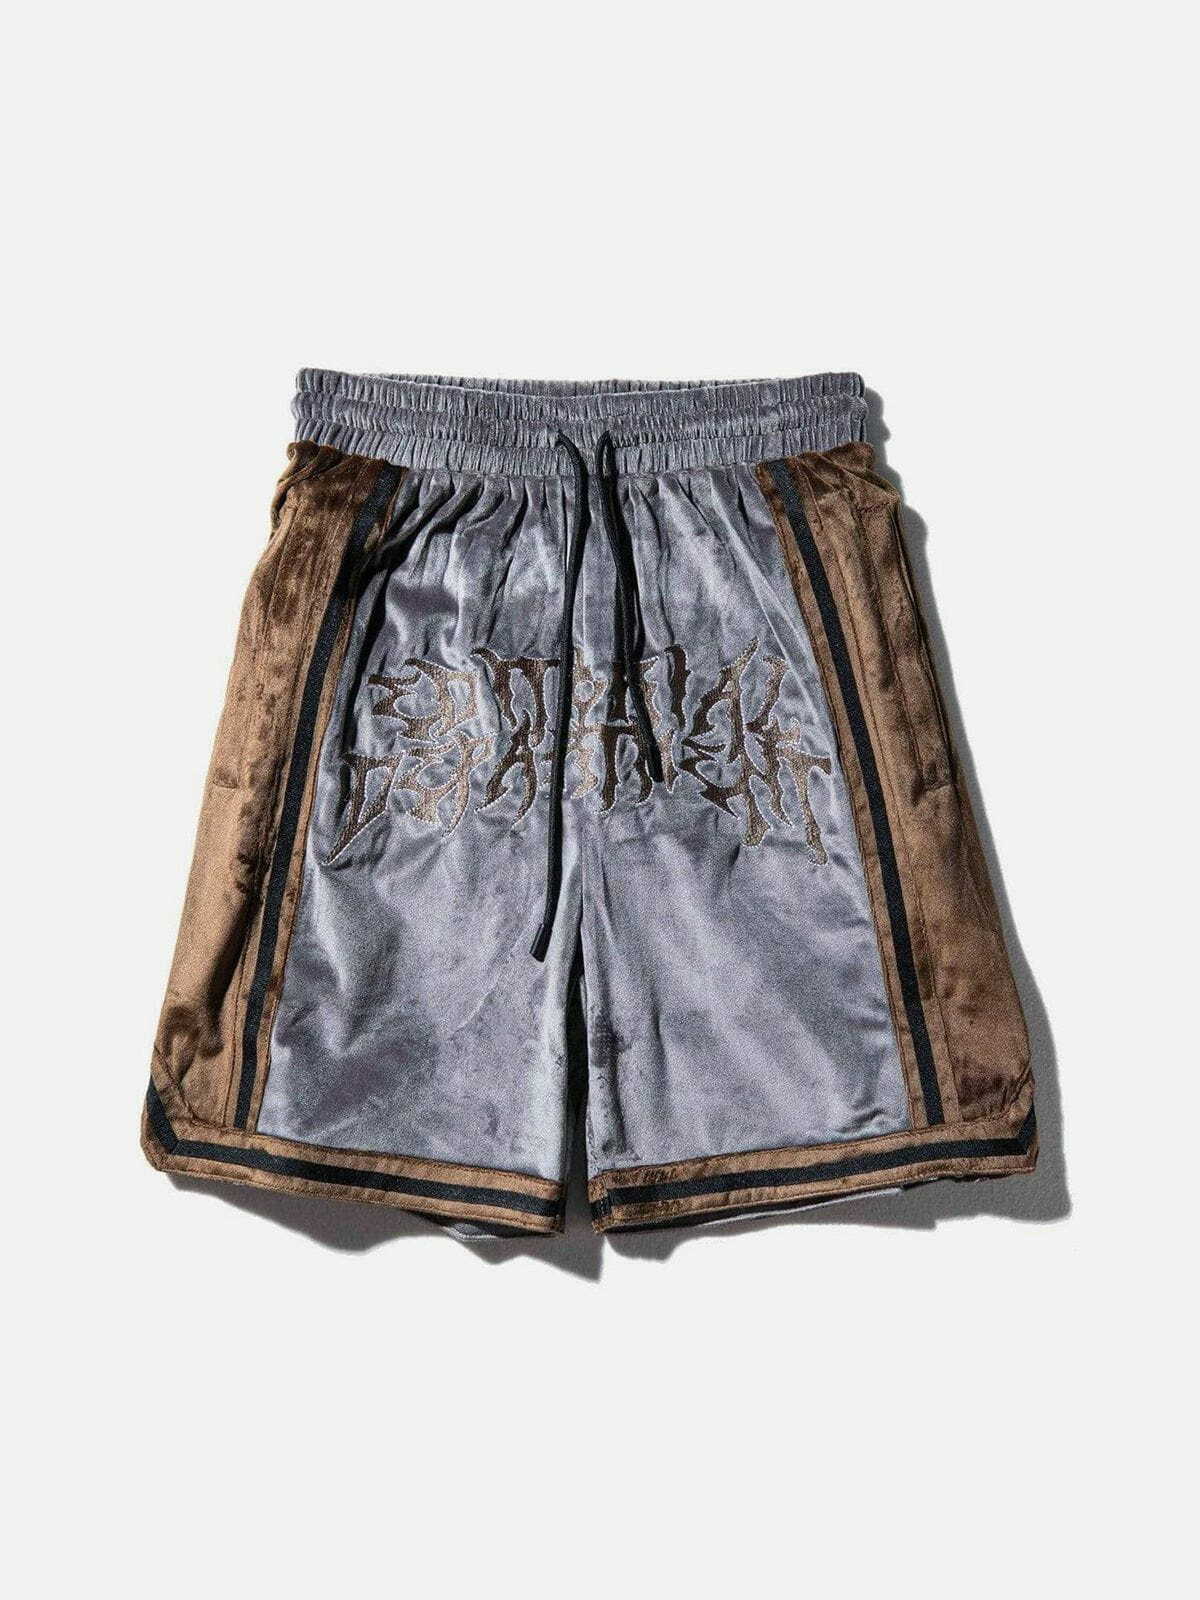 retroinspired suede shorts edgy  vibrant streetwear essential 4074